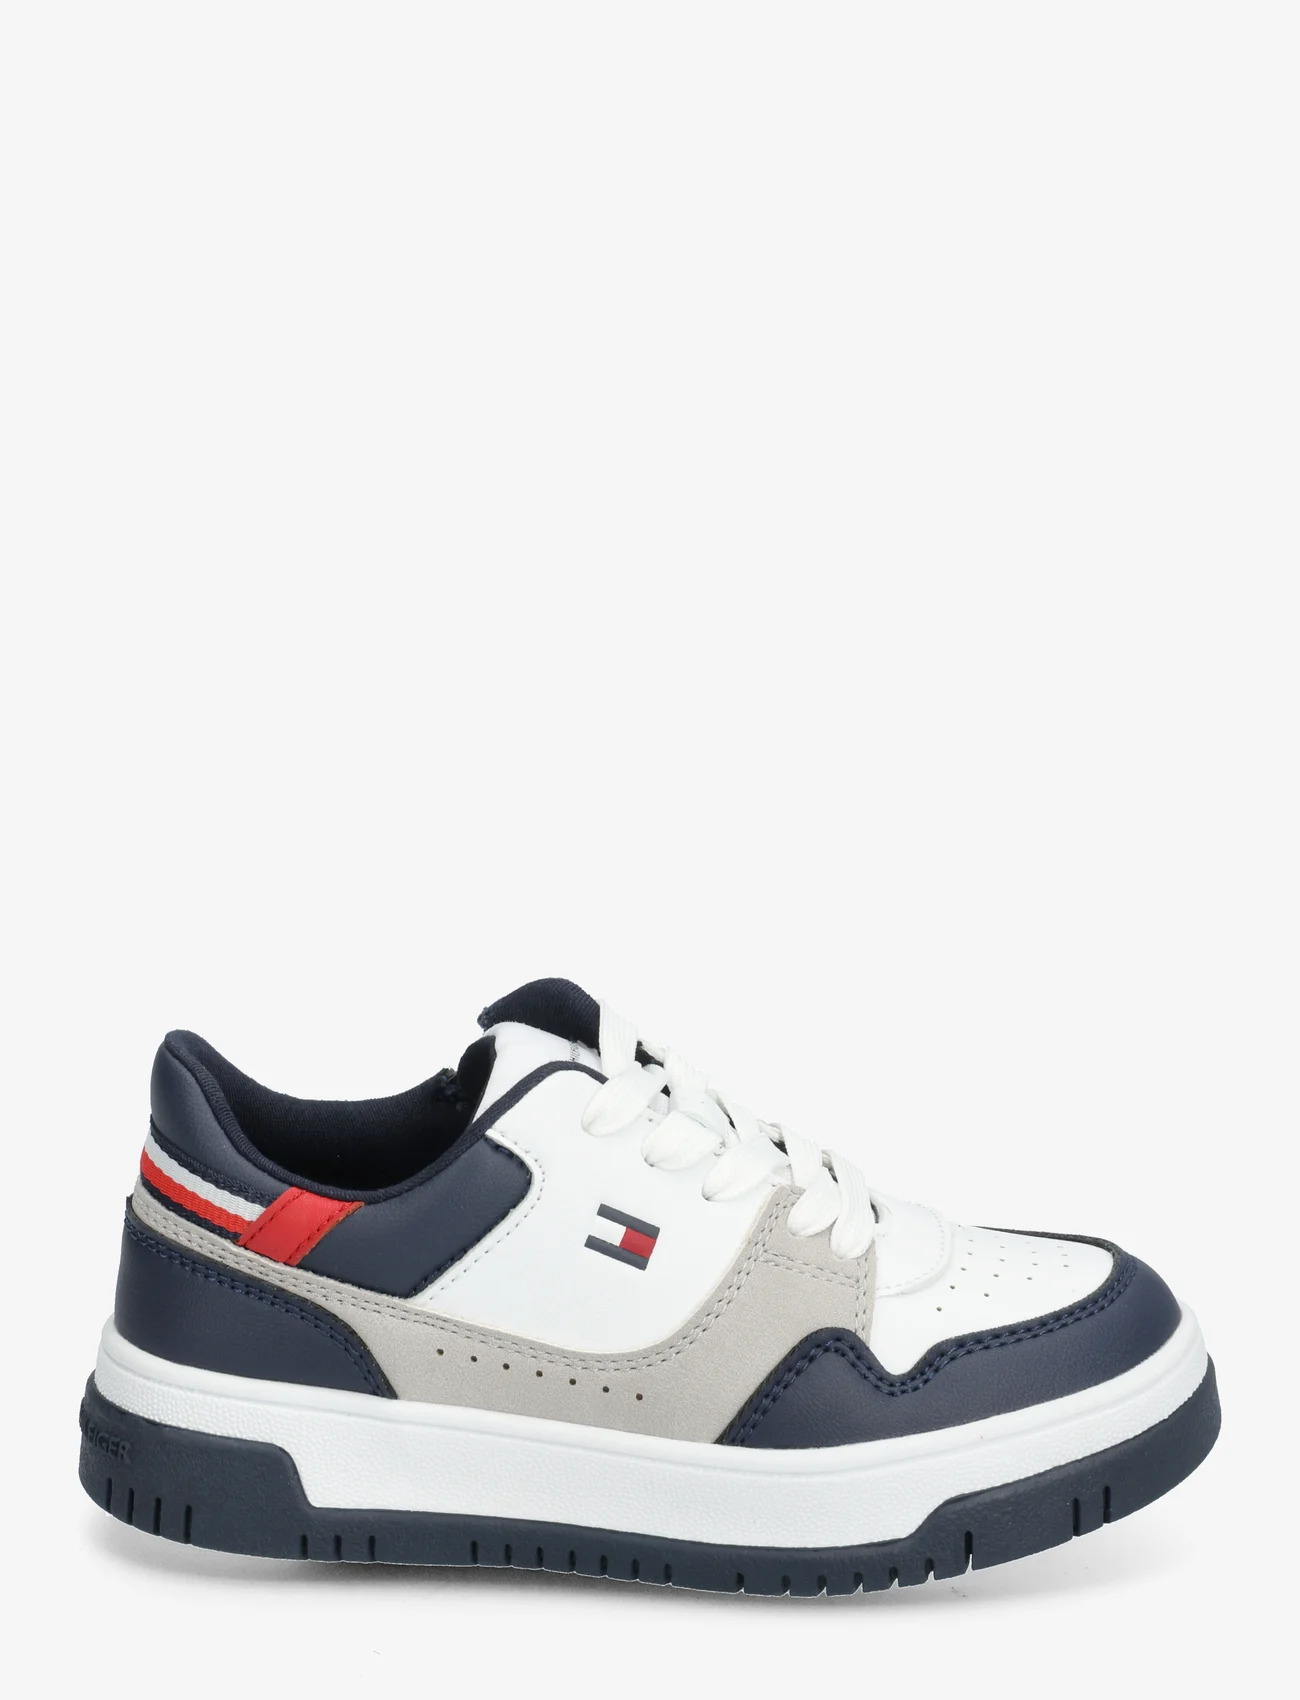 Tommy Hilfiger - LOW CUT LACE-UP SNEAKER - sommerschnäppchen - white/blue/red - 1